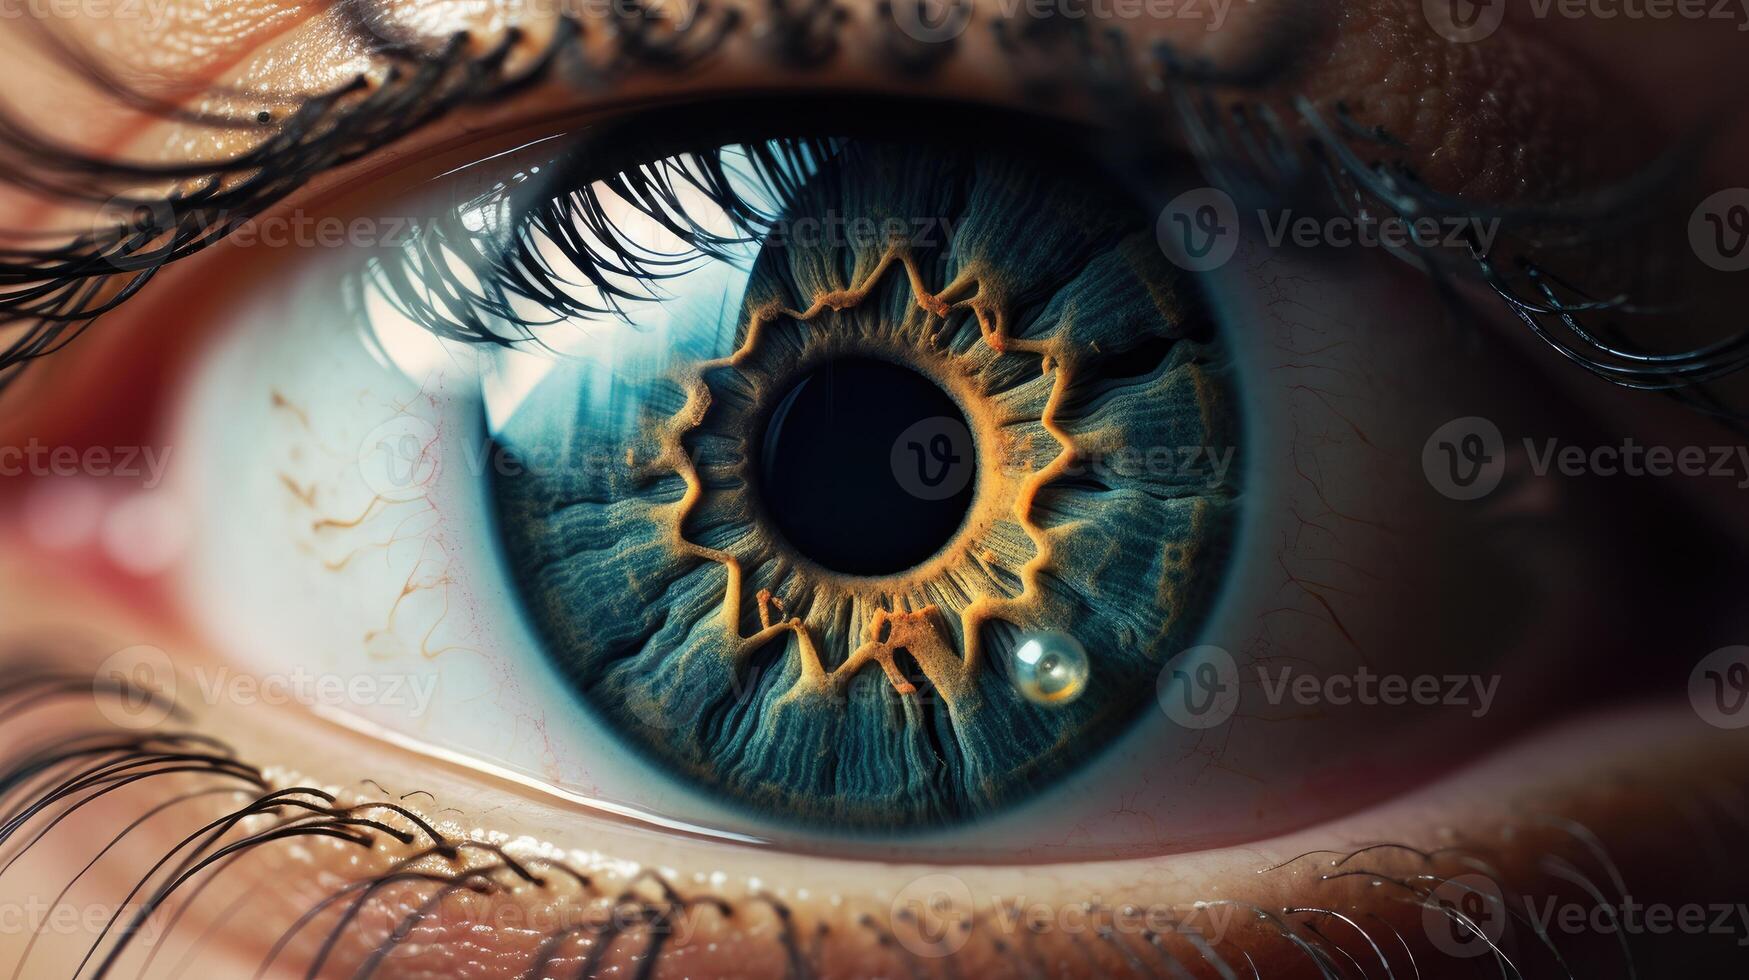 AI generated Extreme closeup image of a human eye. Macro photography with the concept of healthy vision, eye treatment education, and futuristic professional photo shoots.